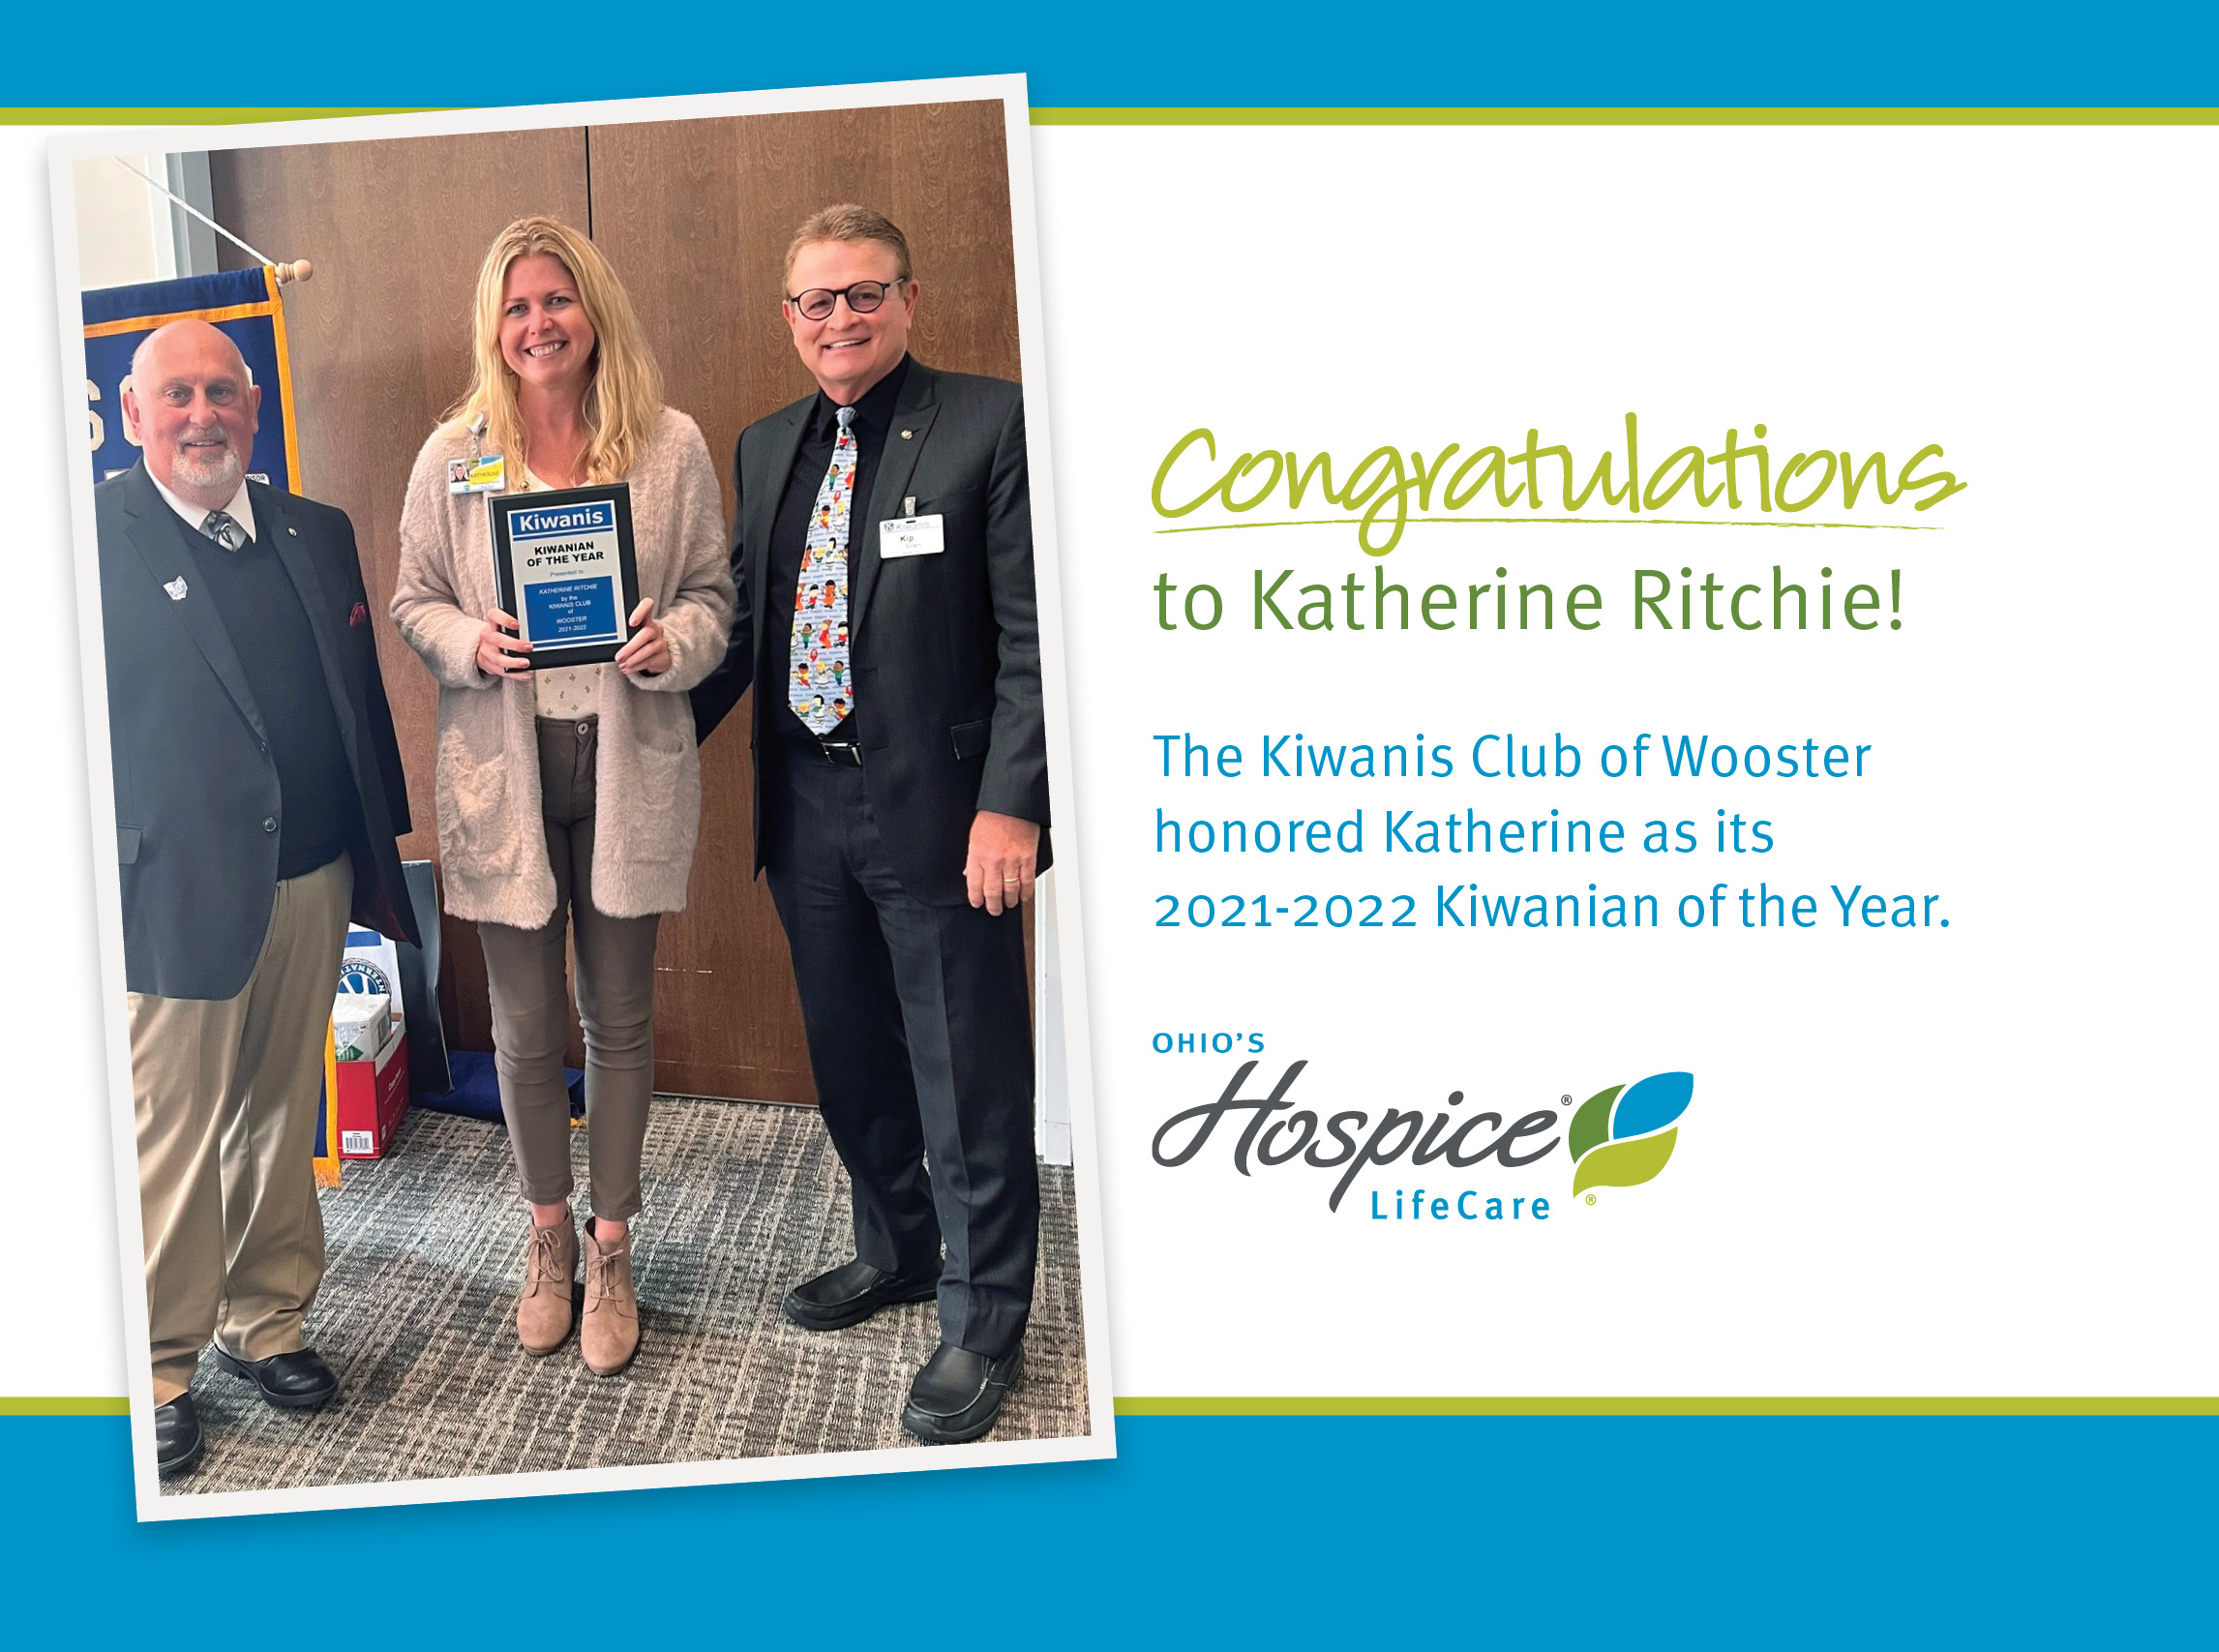 Congratulations to Katherine Ritchie! The Kiwanis Club of Wooster honored Katherine as its 2021-2022 Kiwanian of the Year.